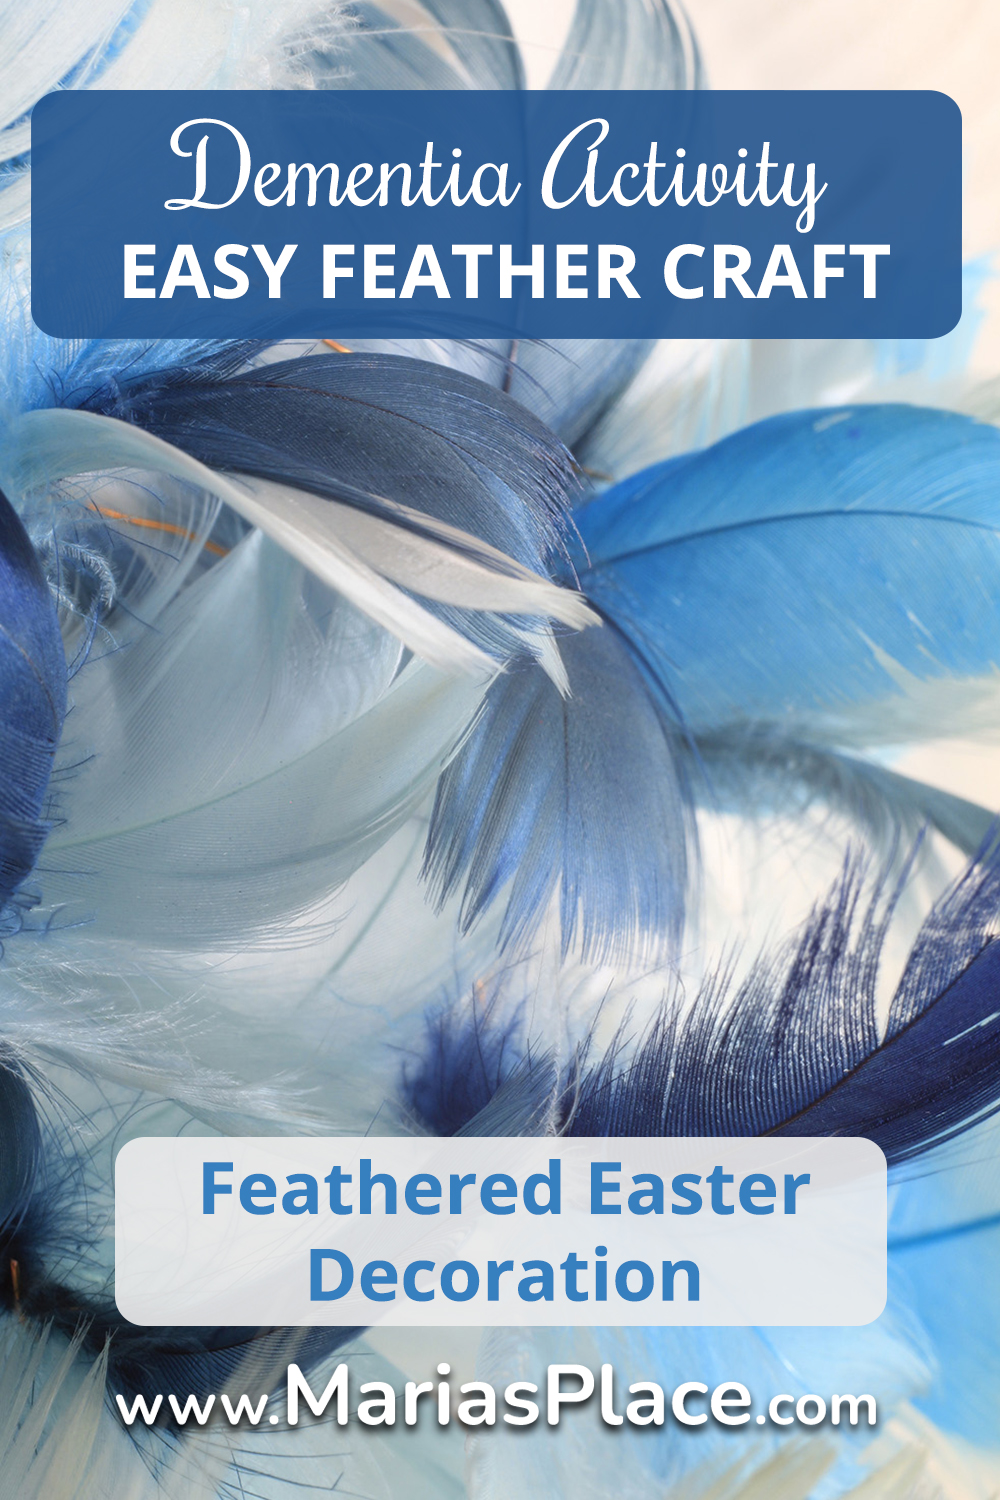 Feathered Easter Decoration